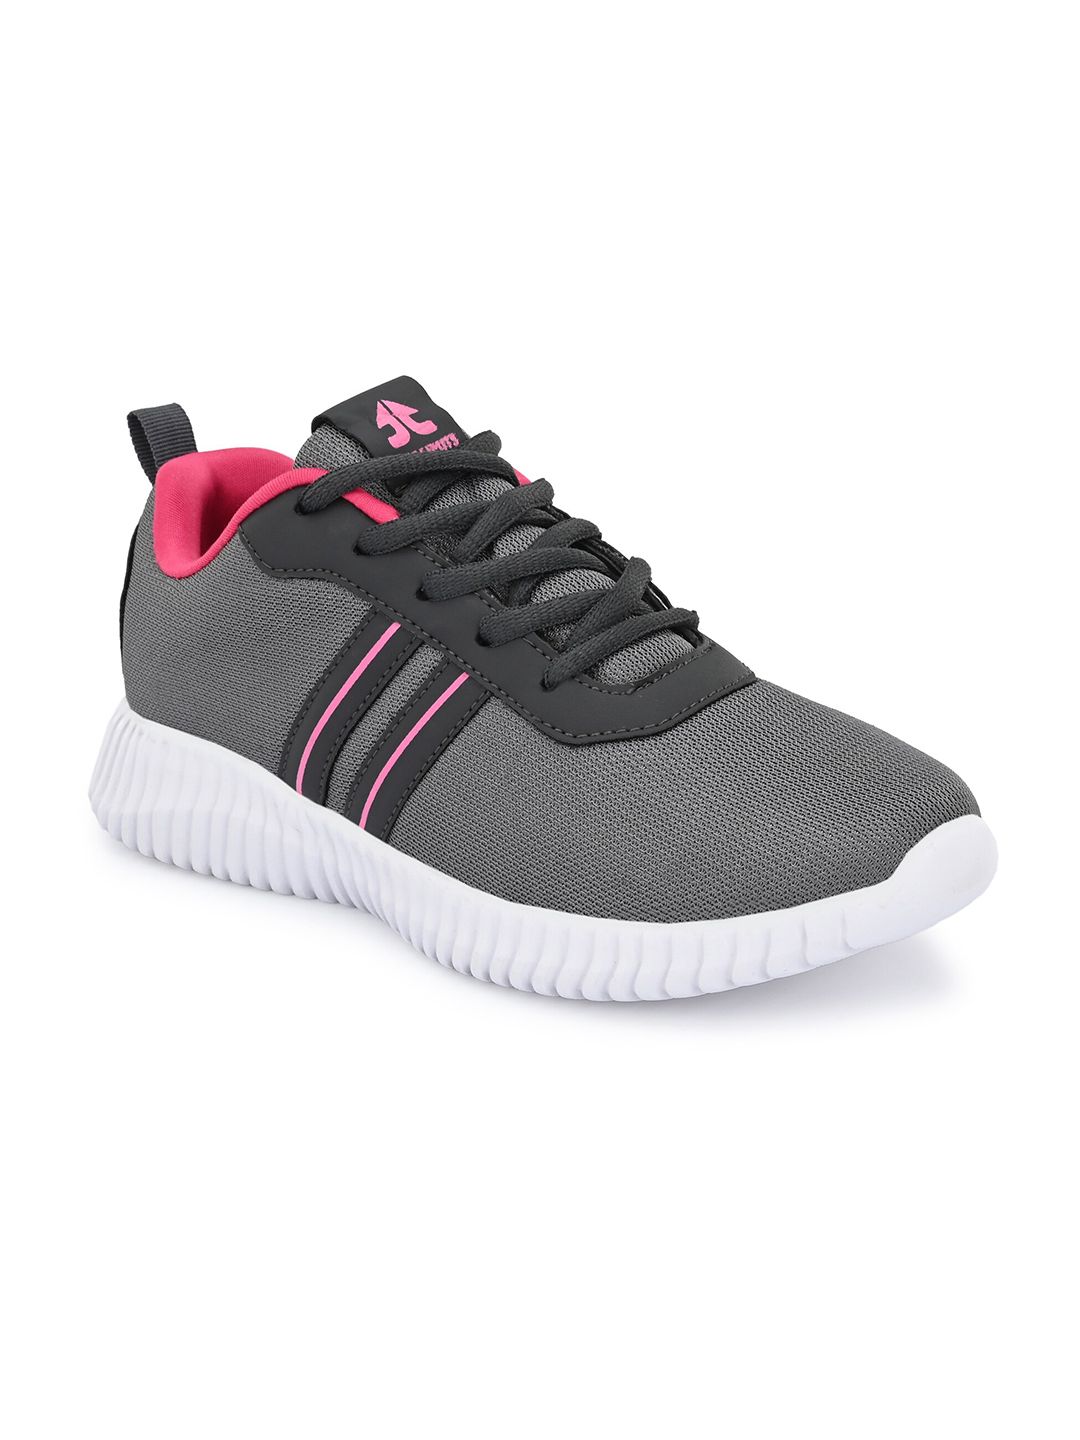 OFF LIMITS Women Grey & Fuchsia Mesh Non-Marking Running Shoes Price in India